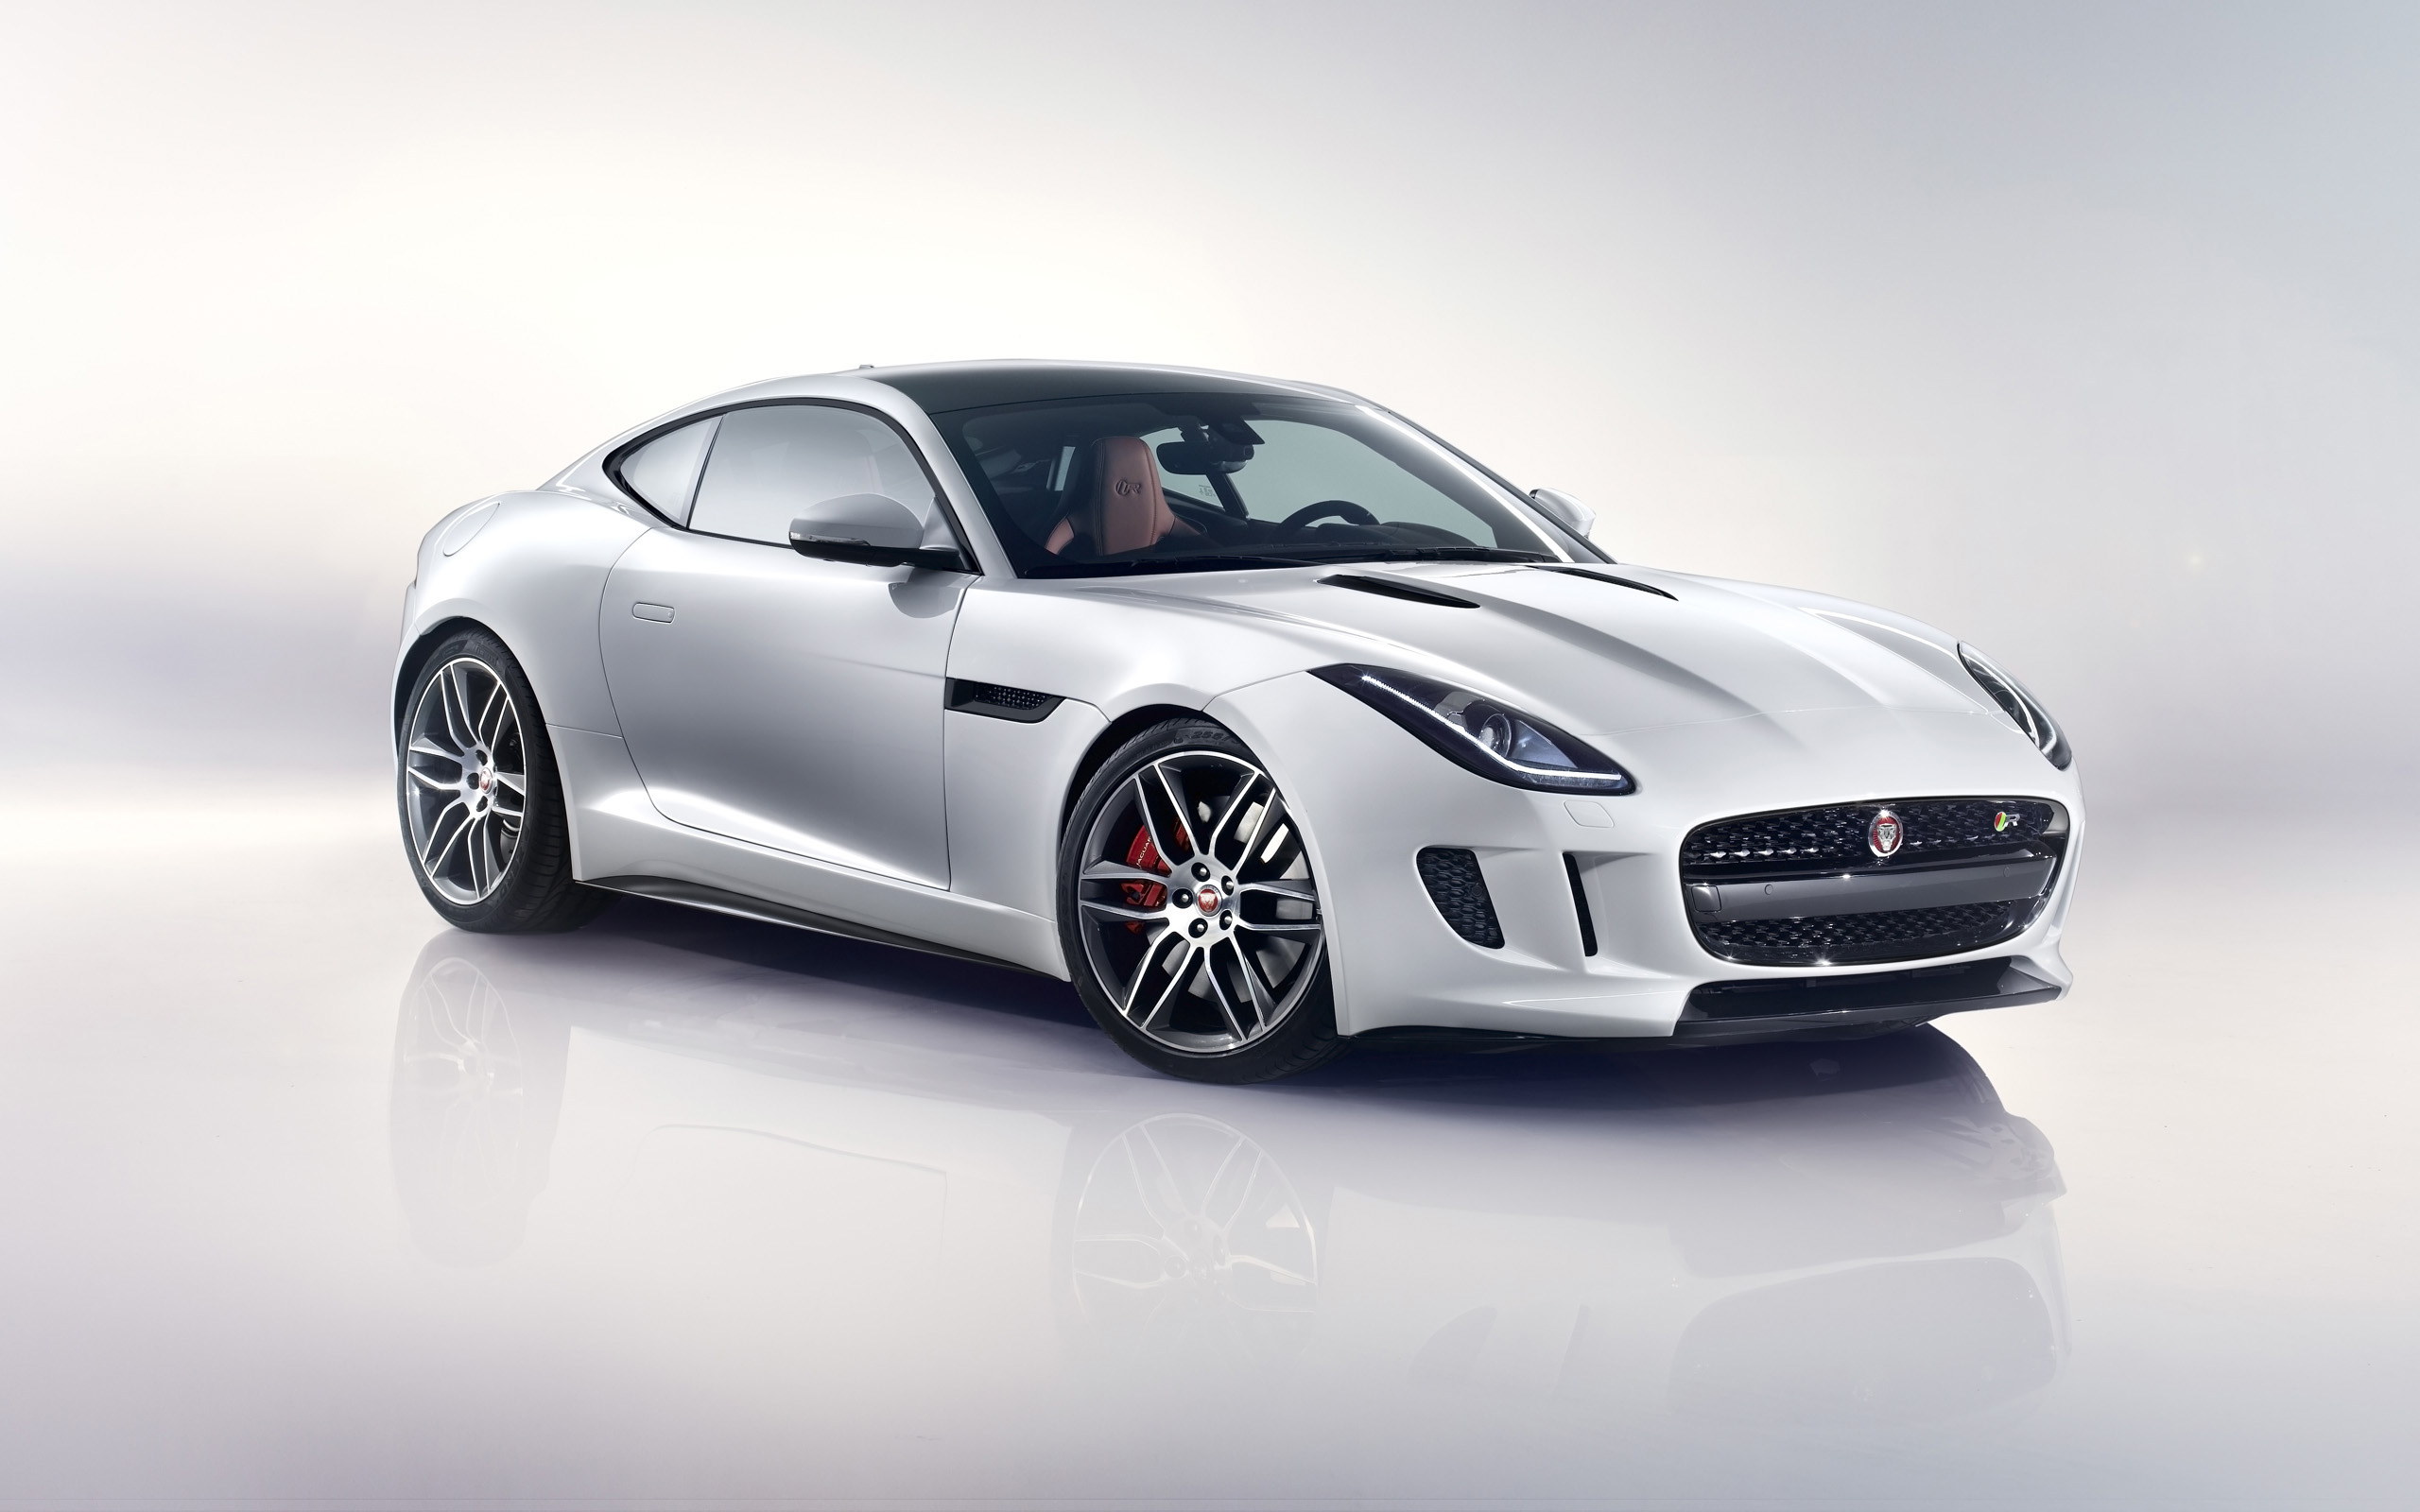 2014 Jaguar F Type R Coupe White Wallpaper | HD Car Wallpapers | ID #4227